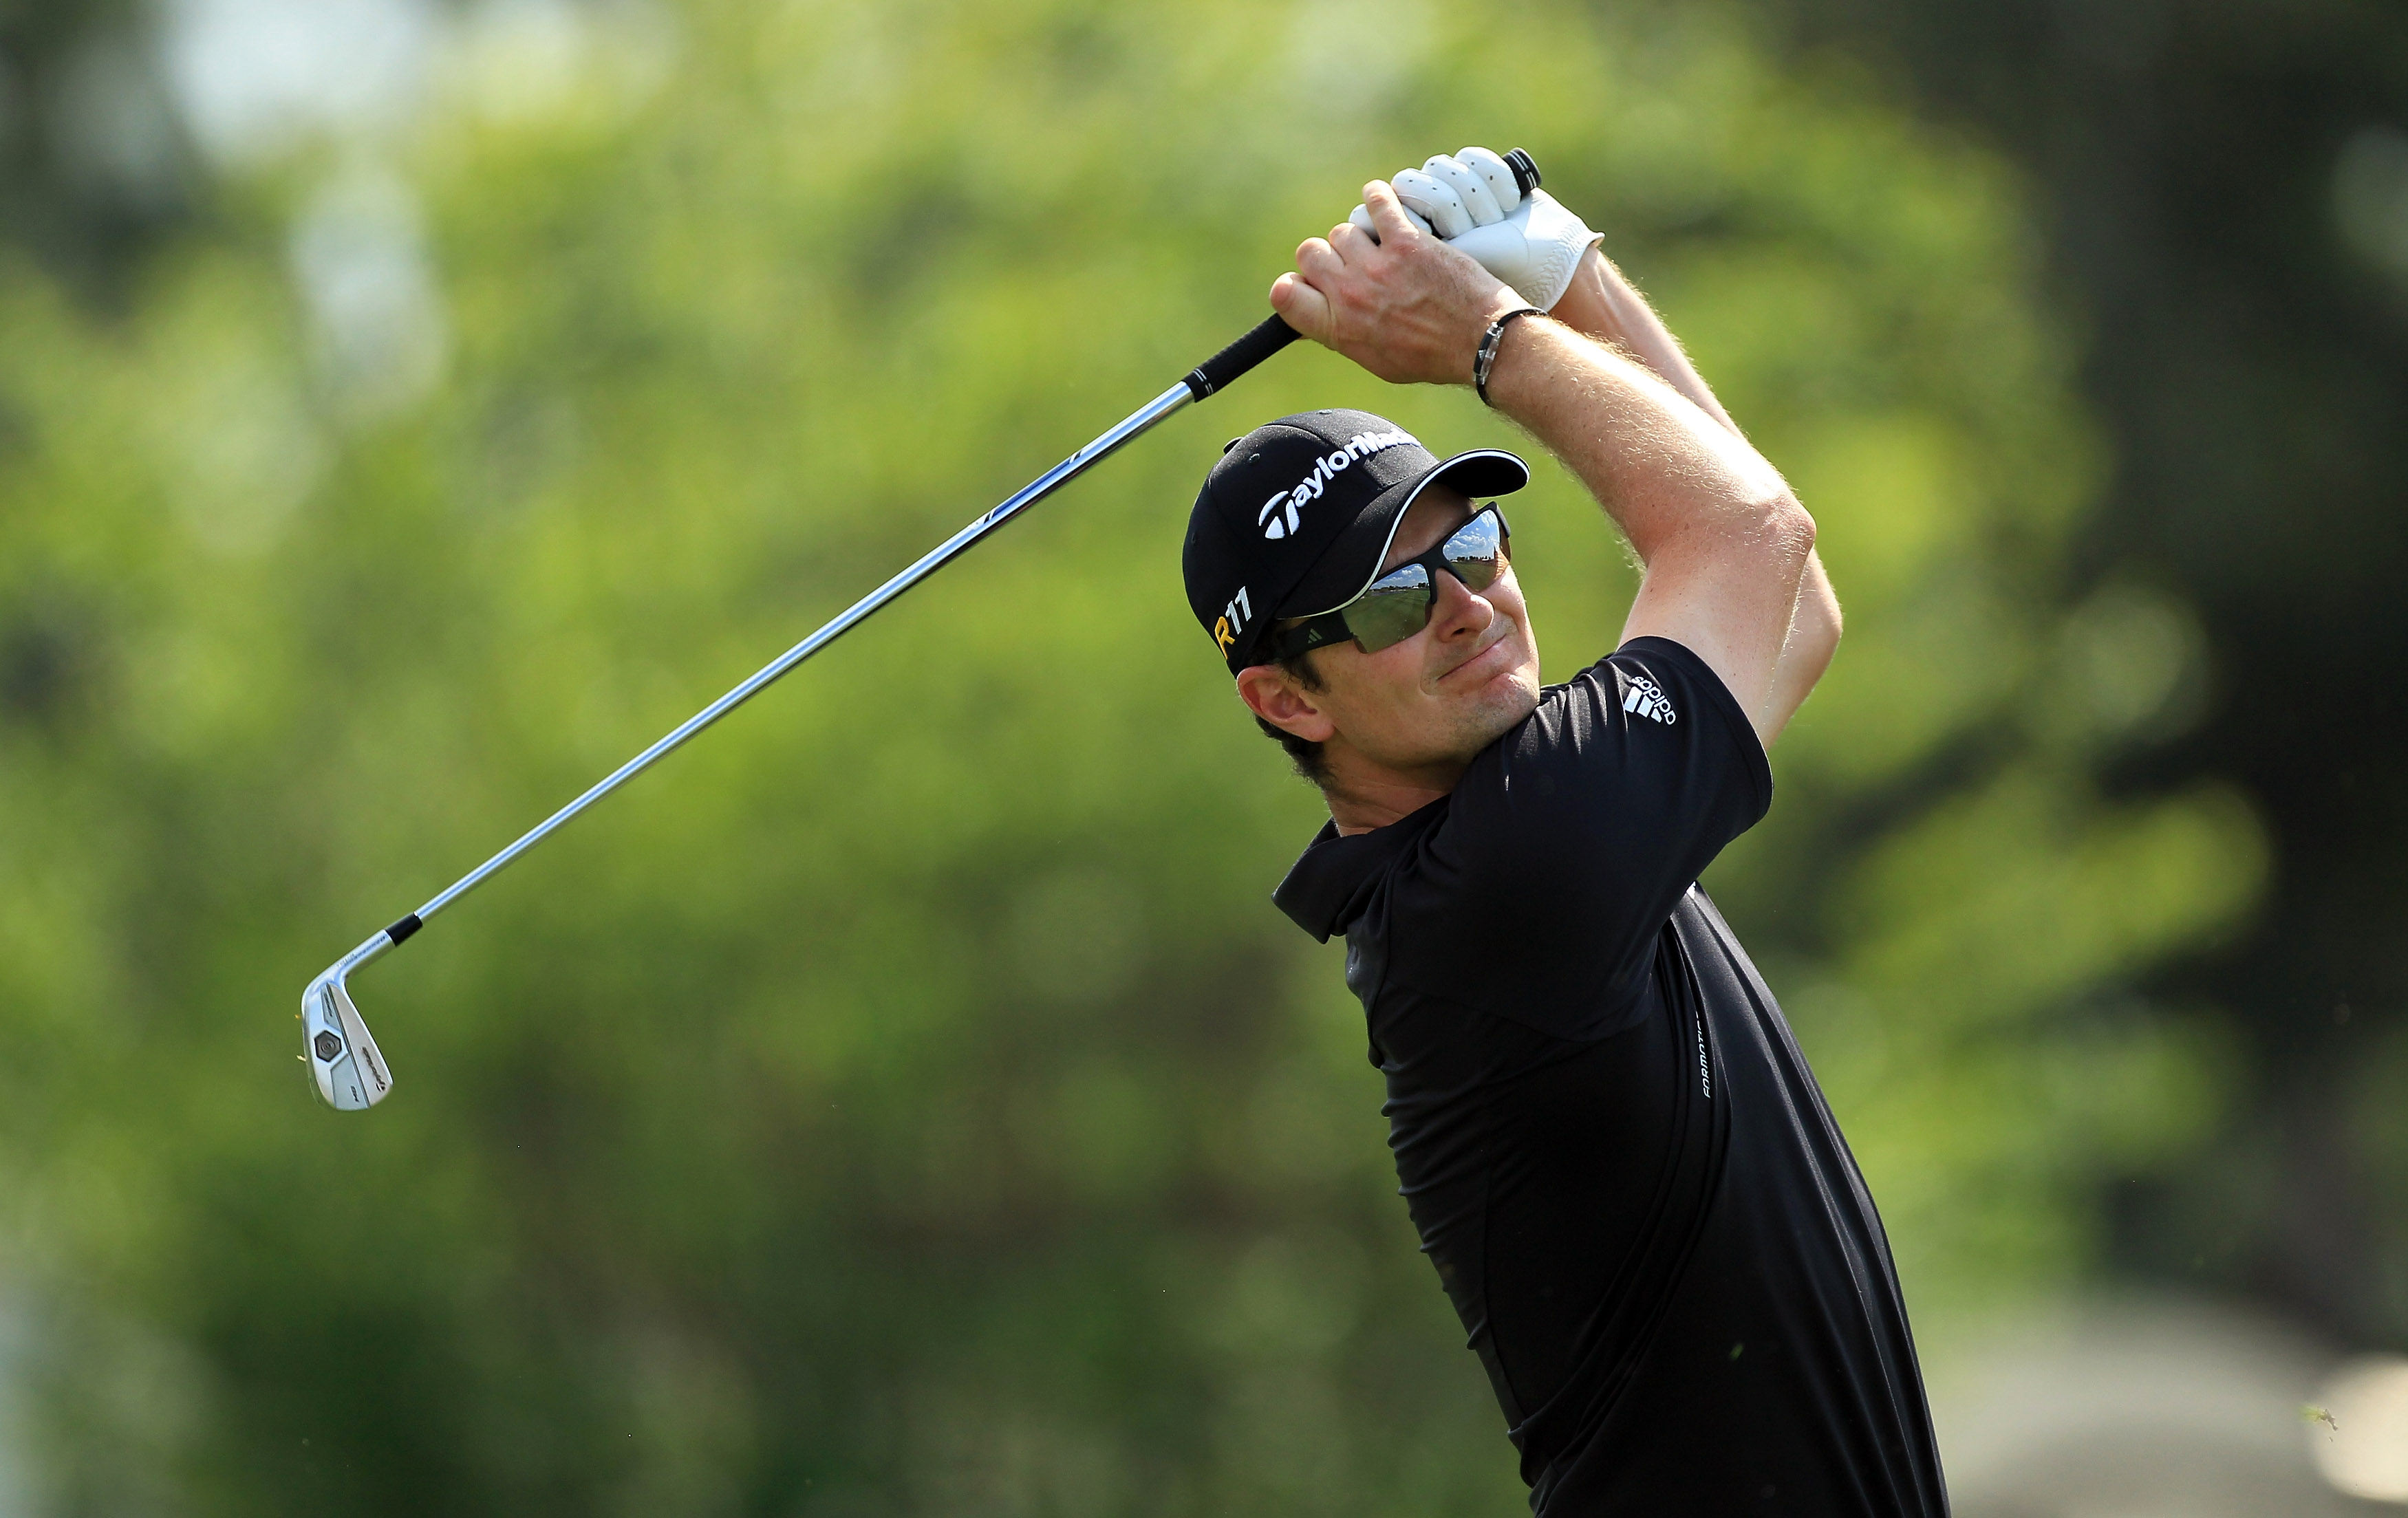 ORLANDO, FL - MARCH 27:  Justin Rose of England plays his second shot on the 18th hole during the final round of the 2011 Arnold Palmer Invitational presented by Mastercard at the Bay Hill Lodge and Country Club on March 27, 2011 in Orlando, Florida.  (Ph